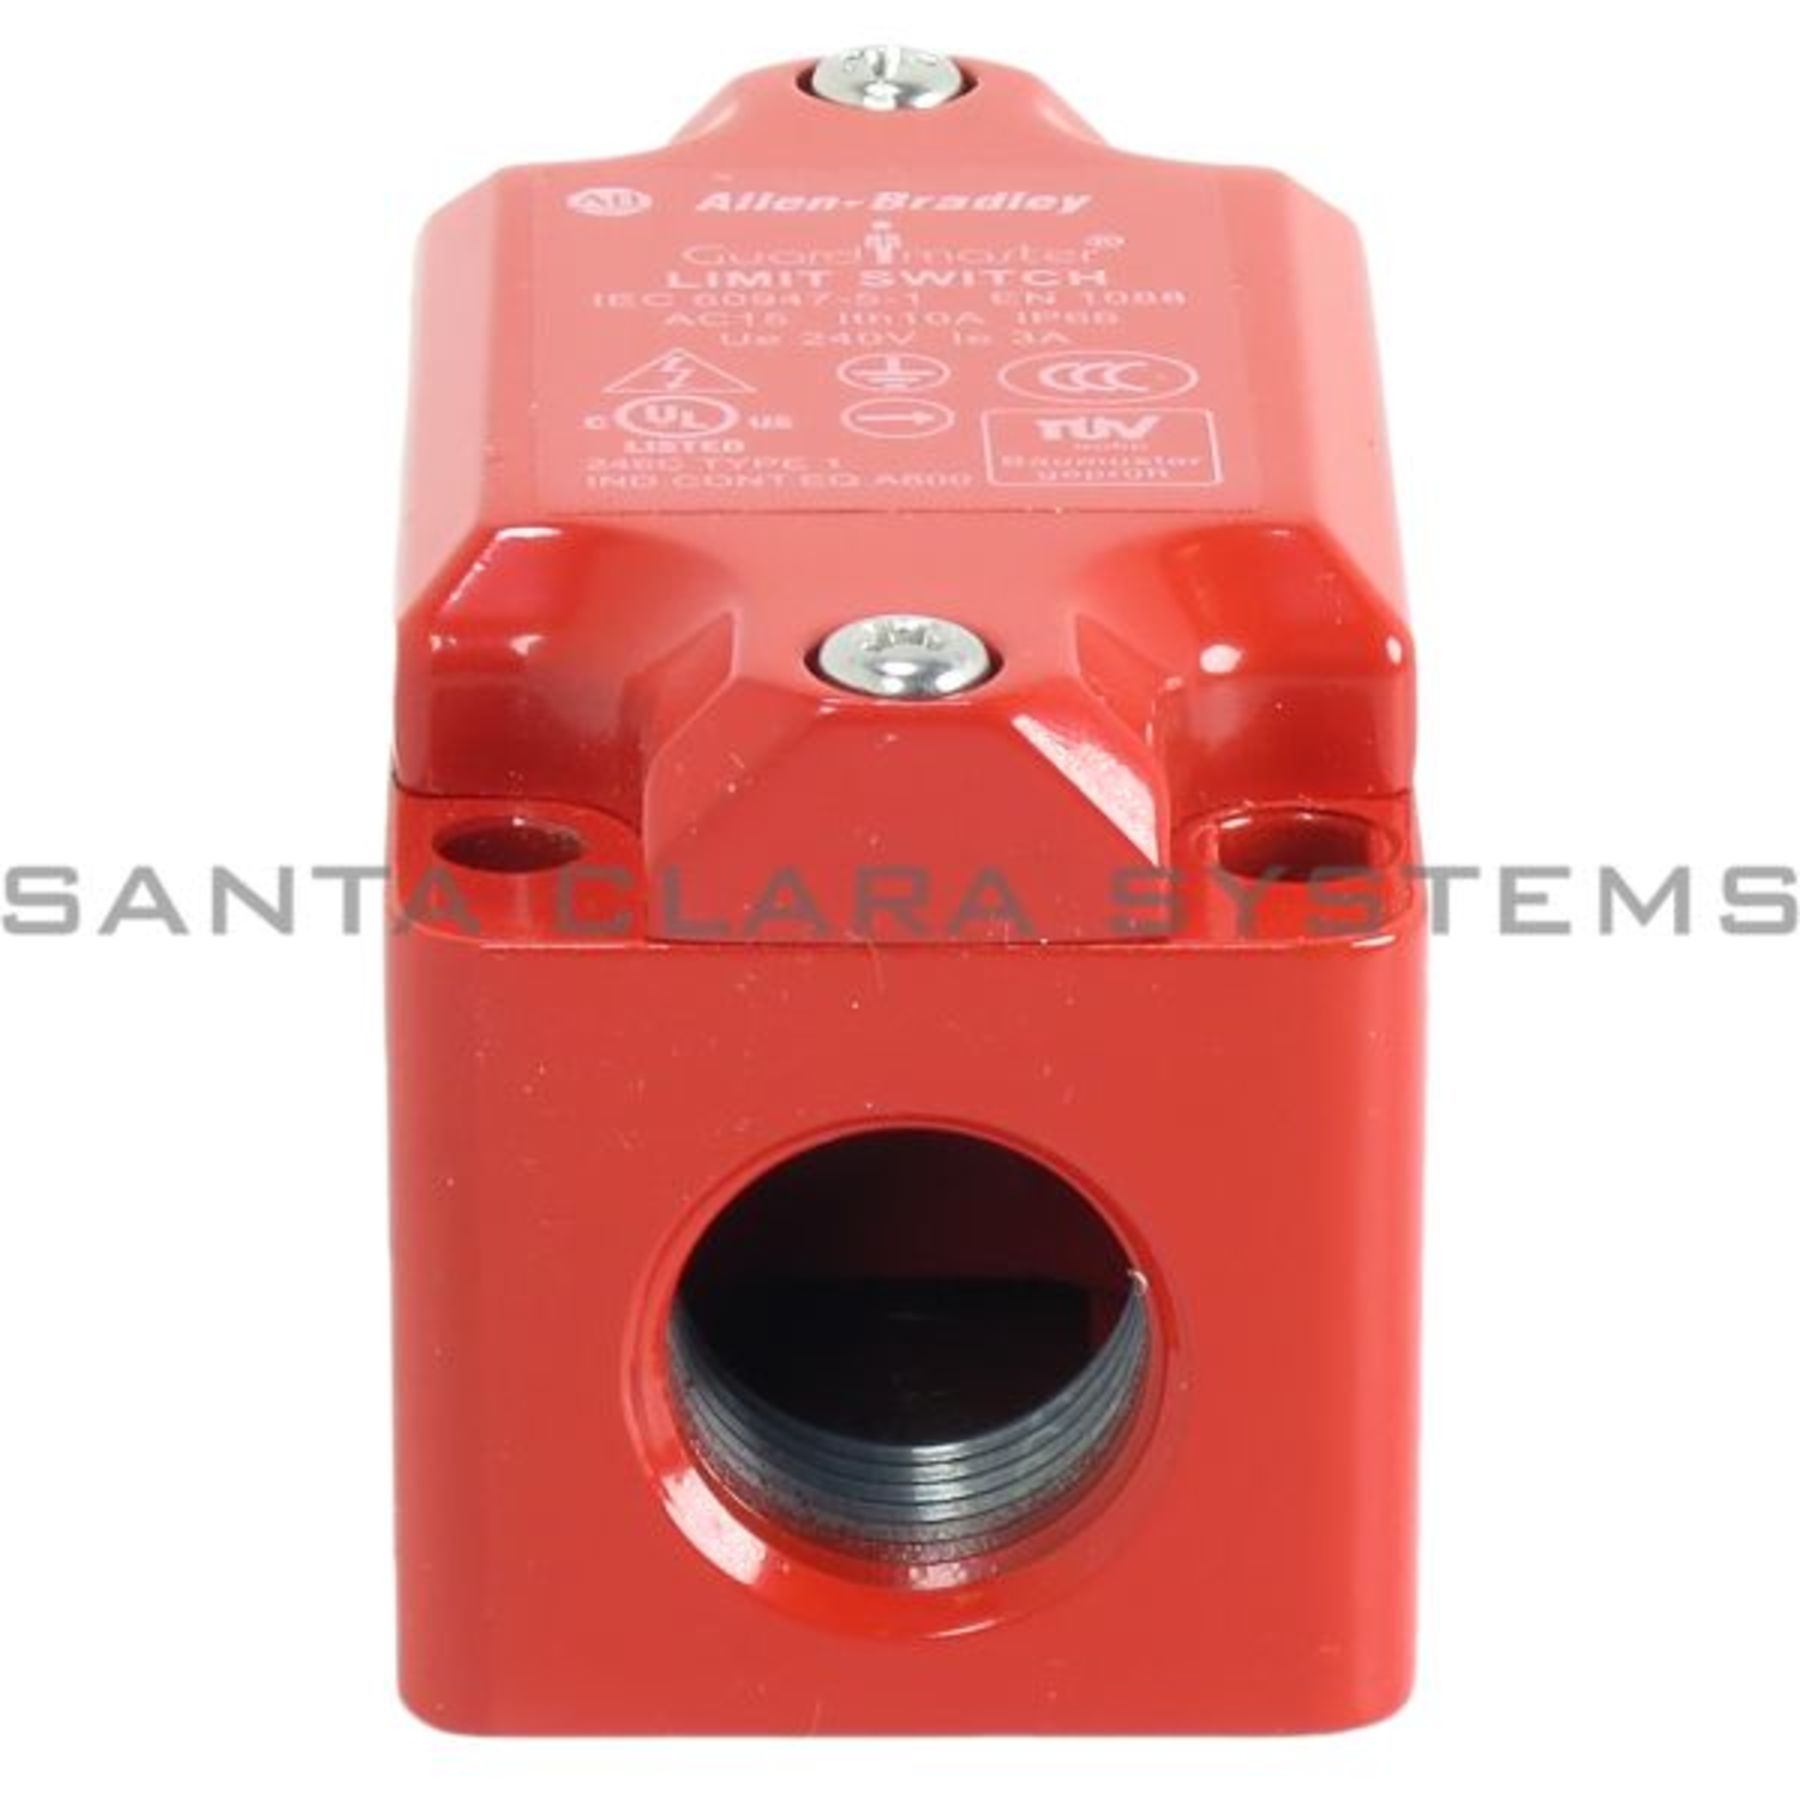 1 NORMALLY CLOSED IEC STYLE SAFETY CONTACTS ACTUATOR METAL ROLLER PLUNGER 1 NORMALLY OPEN 30MM METAL BODY AUXILIARY CONTACTS SAFETY SNAP ACTION GUARDMASTER LTD 440P-MRPS11B LIMIT SWITCH M20 